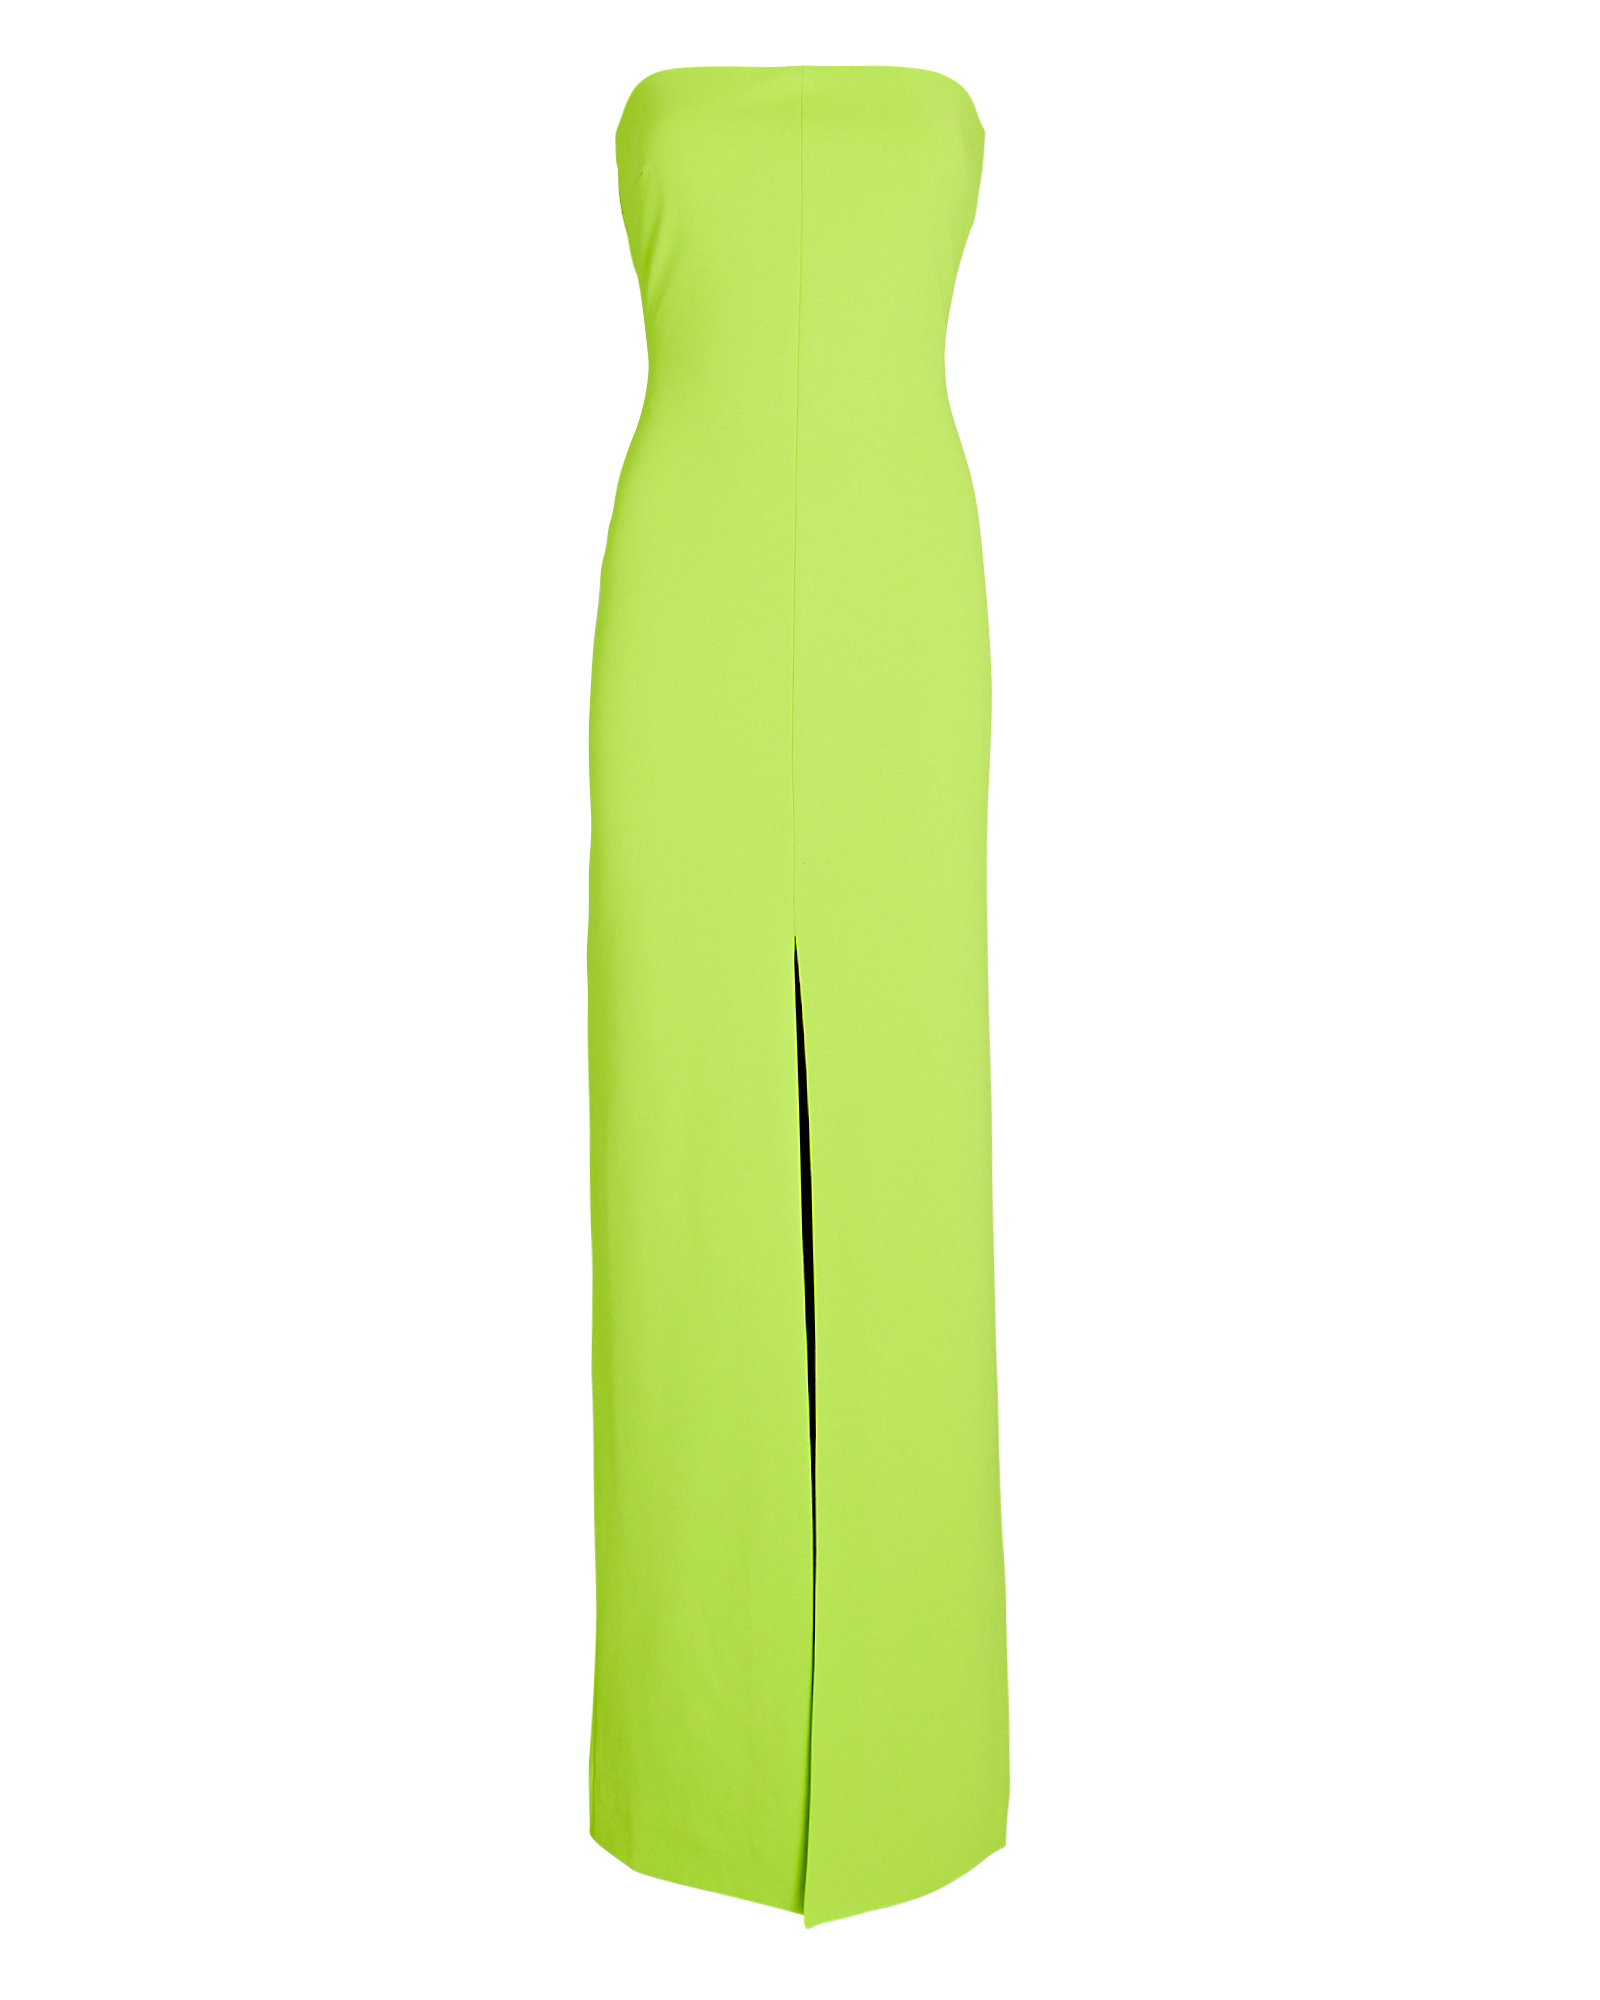 Solace London Bysha Stretch-Crepe Maxi Dress in Lime | INTERMIX®